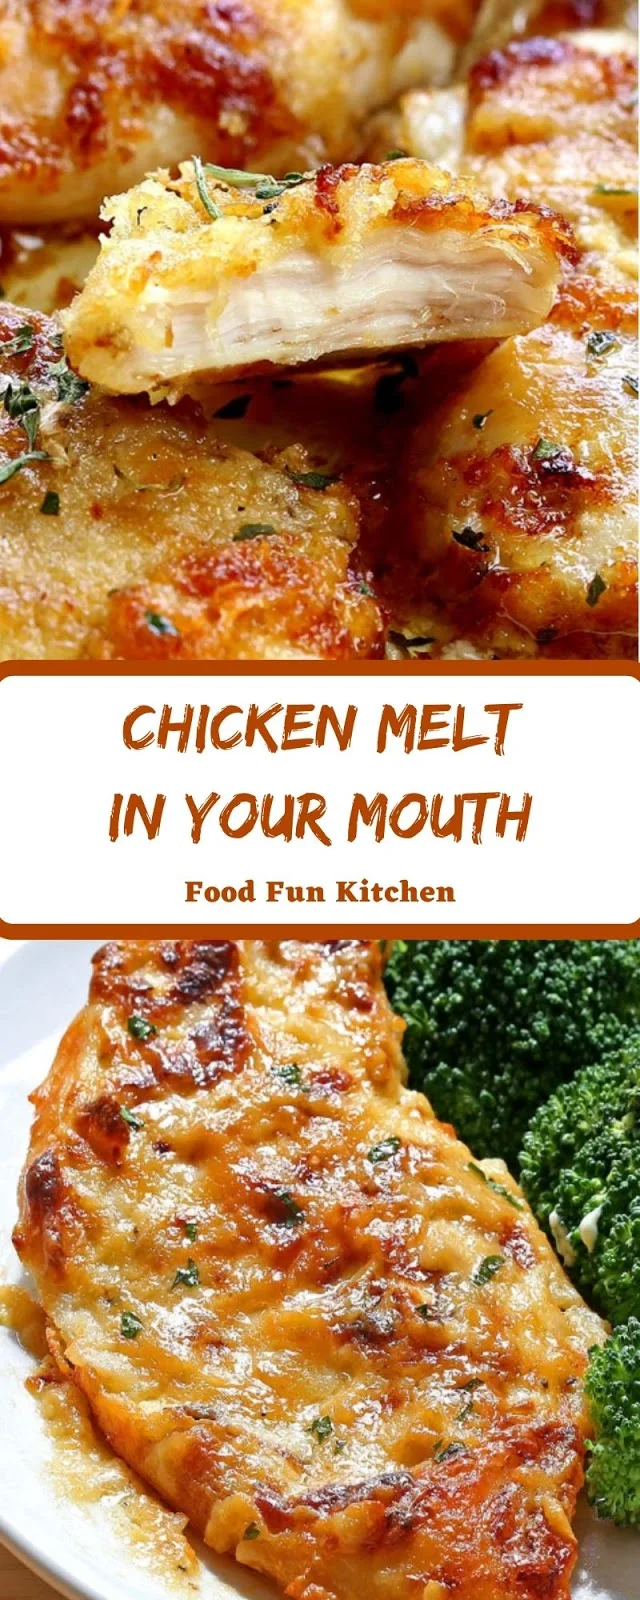 DELICIOUS CHICKEN MELT IN YOUR MOUTH